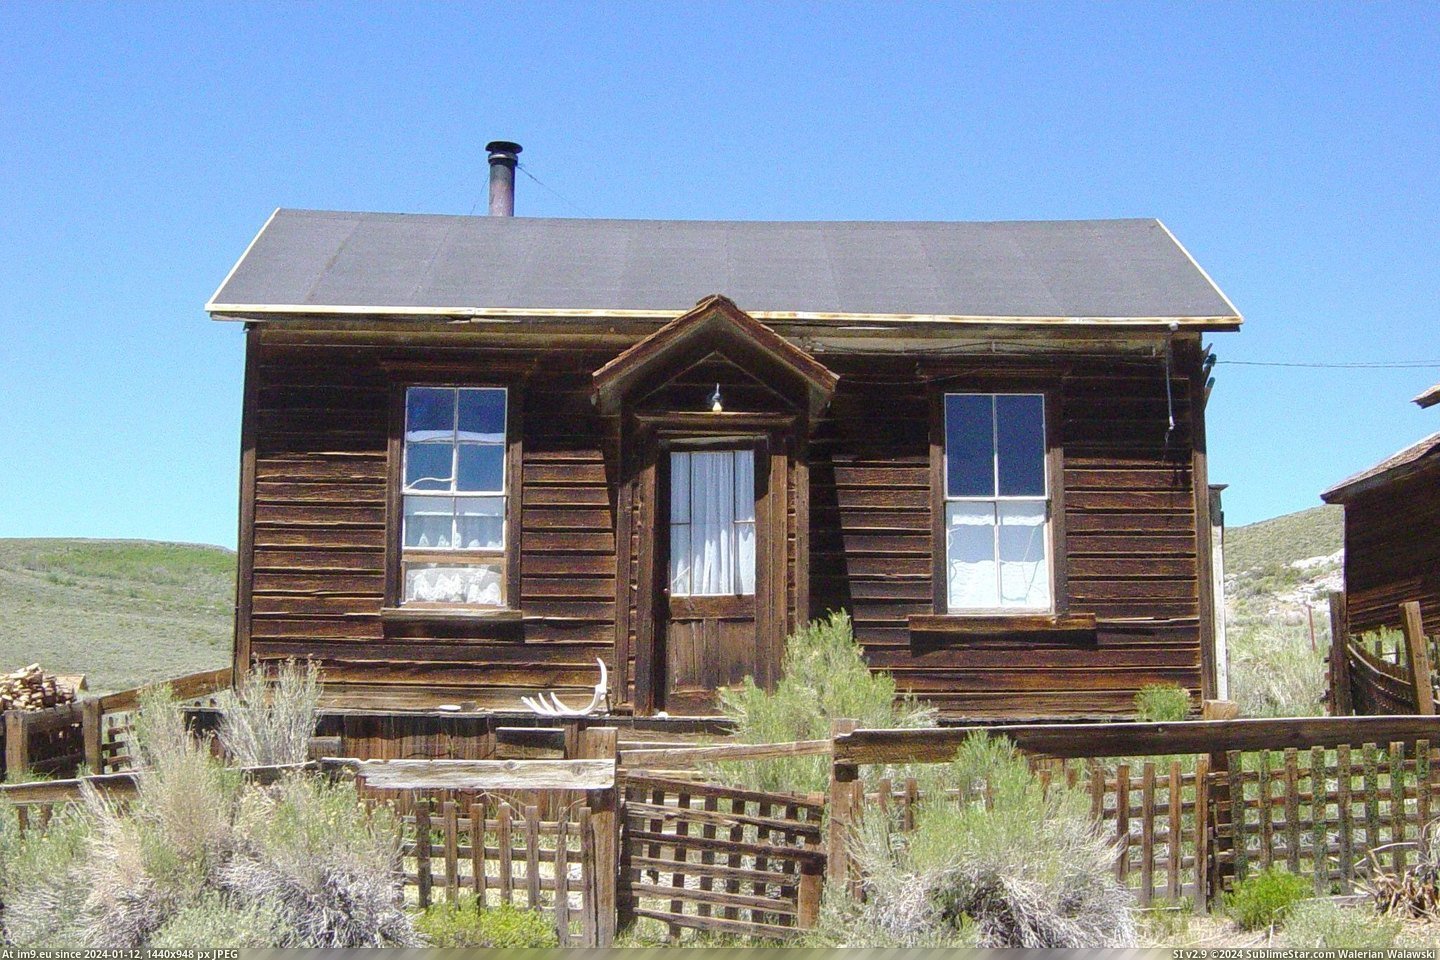 #California #Bodie #Donnelly #House Donnelly House In Bodie, California Pic. (Bild von album Bodie - a ghost town in Eastern California))